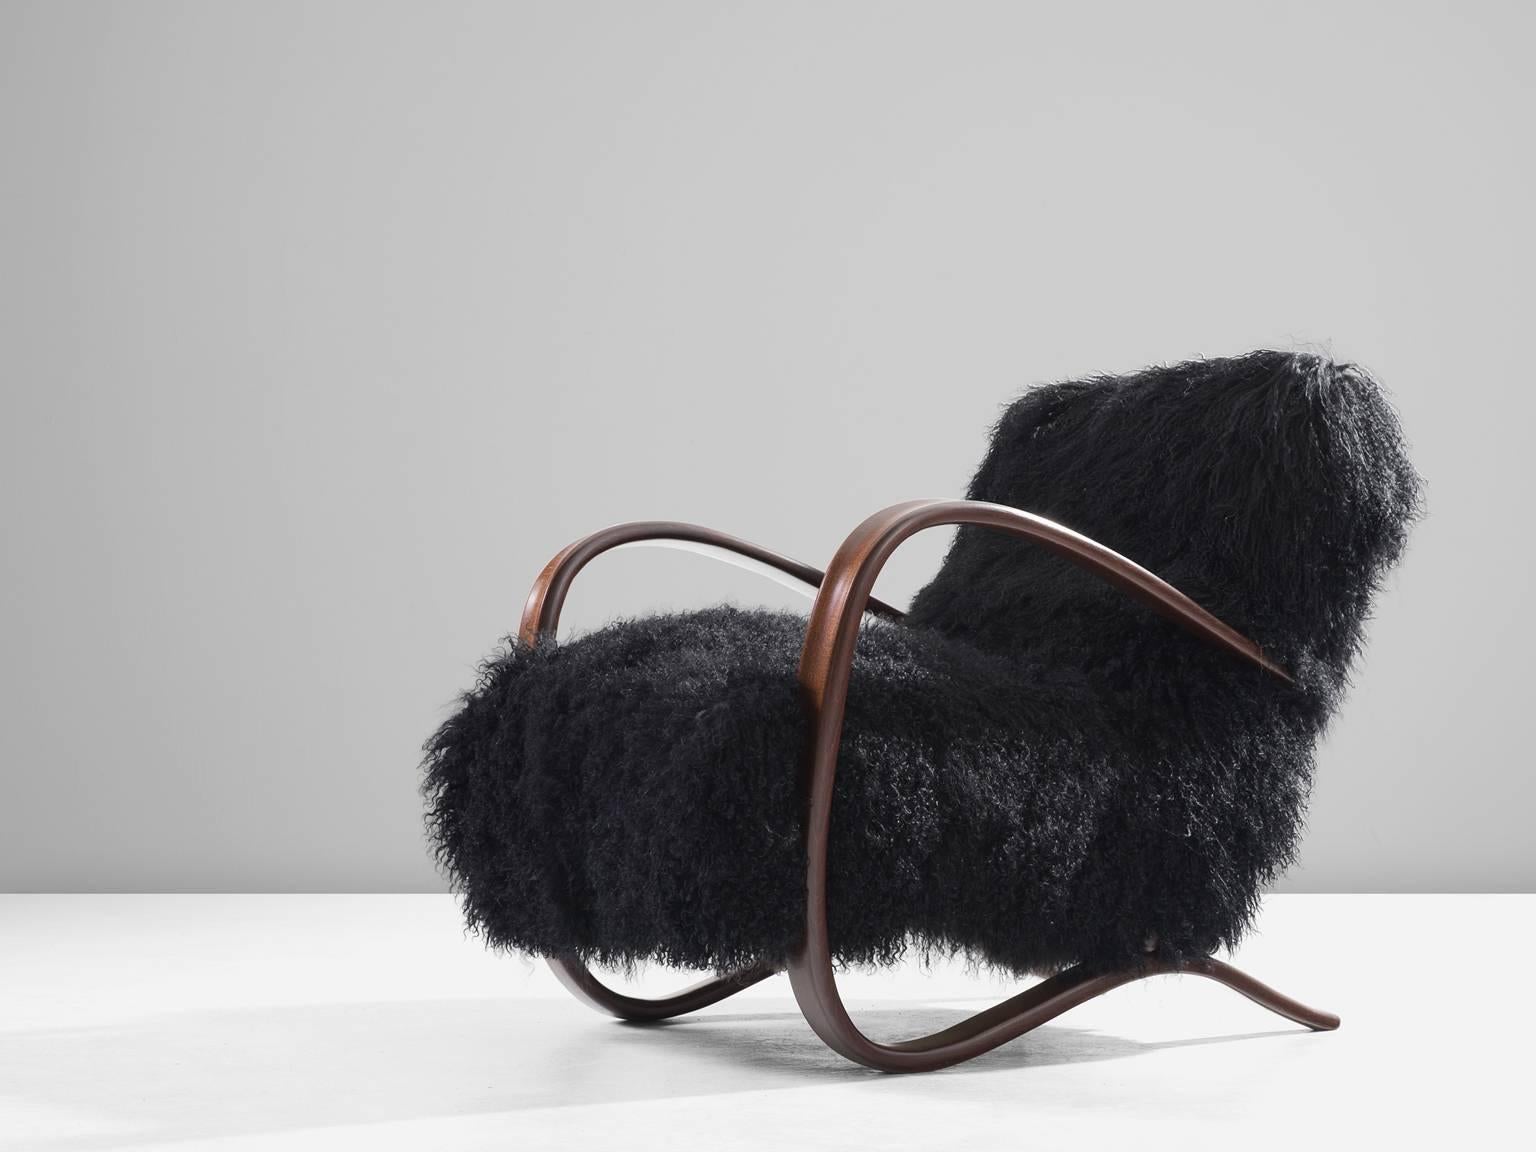 Lounge chair, in beech and sheepskin, by Jindrich Halabala, Czech Republic 1930s.

Extraordinary easy chair with black Tibetan lambswool upholstery. This lounge chair has a very dynamic appearance. The fuzzy upholstery gives this armchair a very